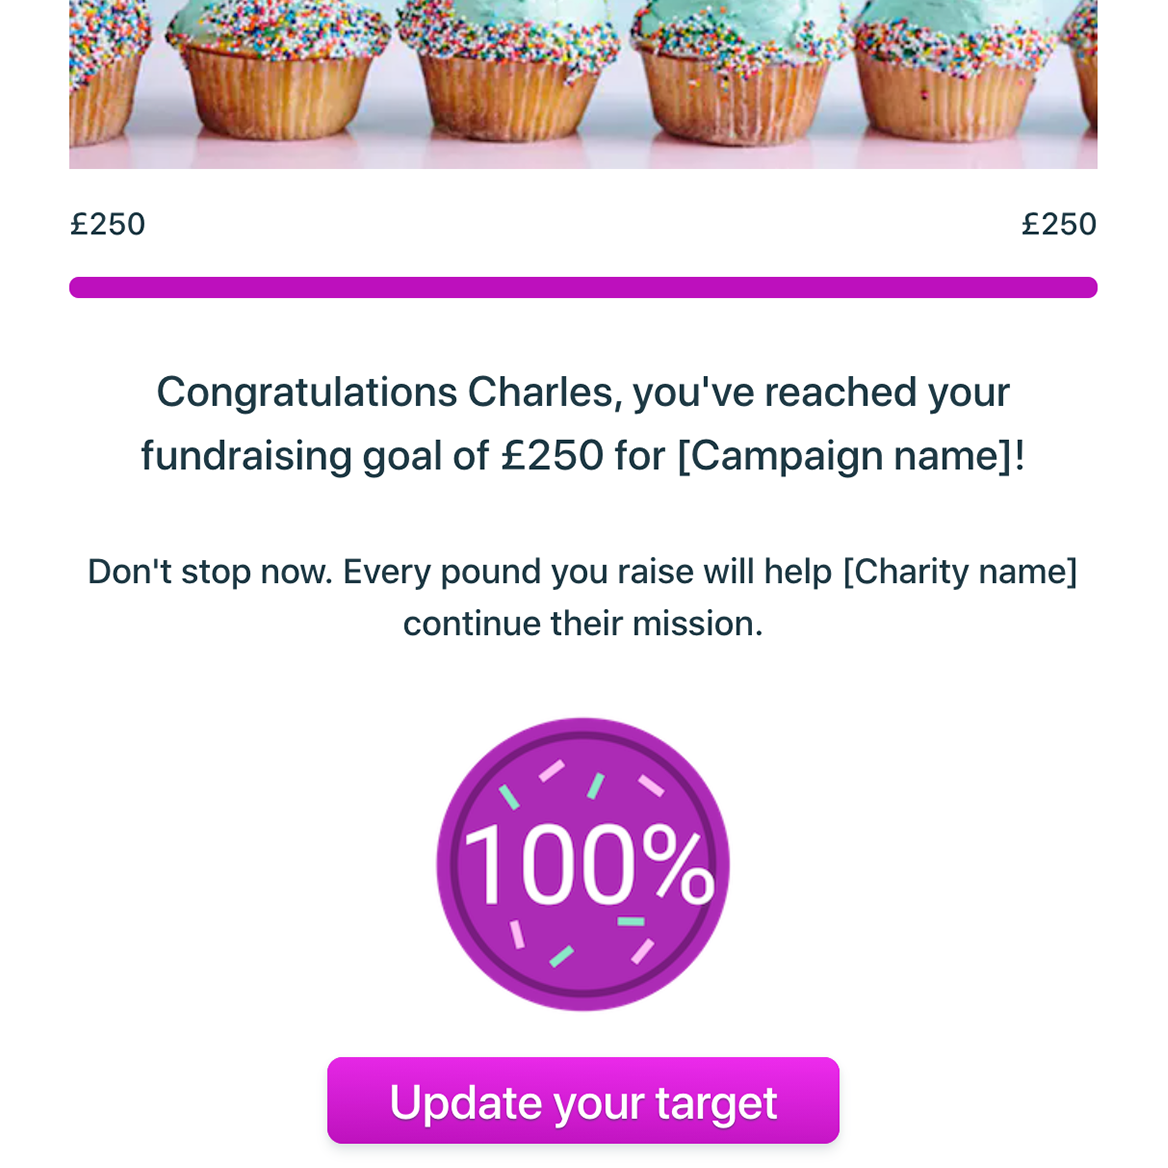 Preview: Recognise - 100% fundraising goal reached